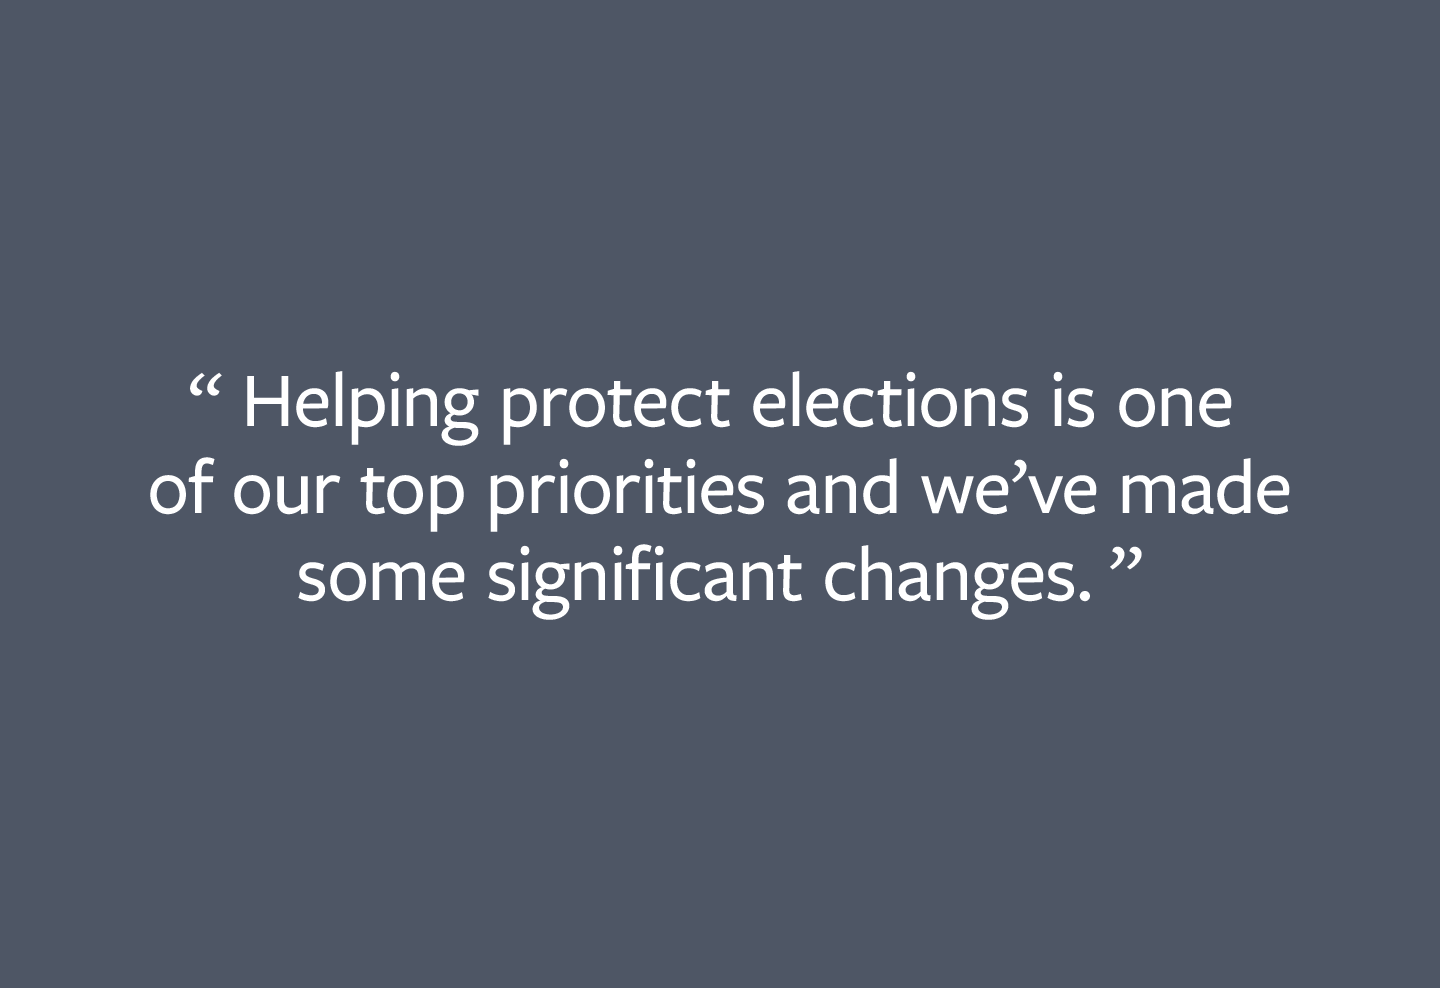 Helping protect elections is one of our top priorities